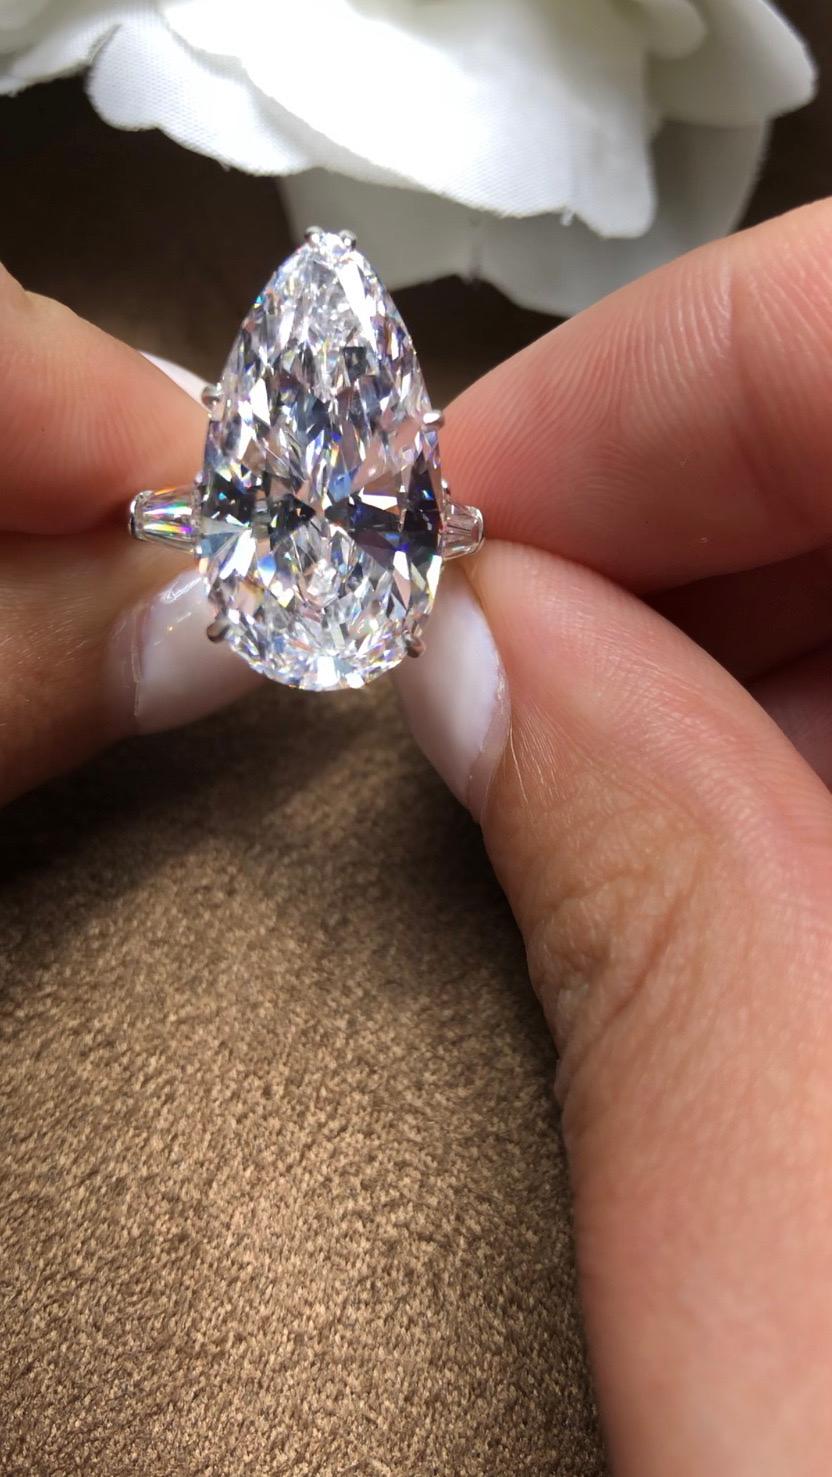 MORCHA Diamonds owns one of the largest private inventories of D Flawless diamonds over 5ct 

A MORCHA 10ct D Flawless Pear Shape Diamond Ring, set with 2 Baguette diamonds.
Cut to the highest standards of Brilliance and Light Return. 
Set with 18k